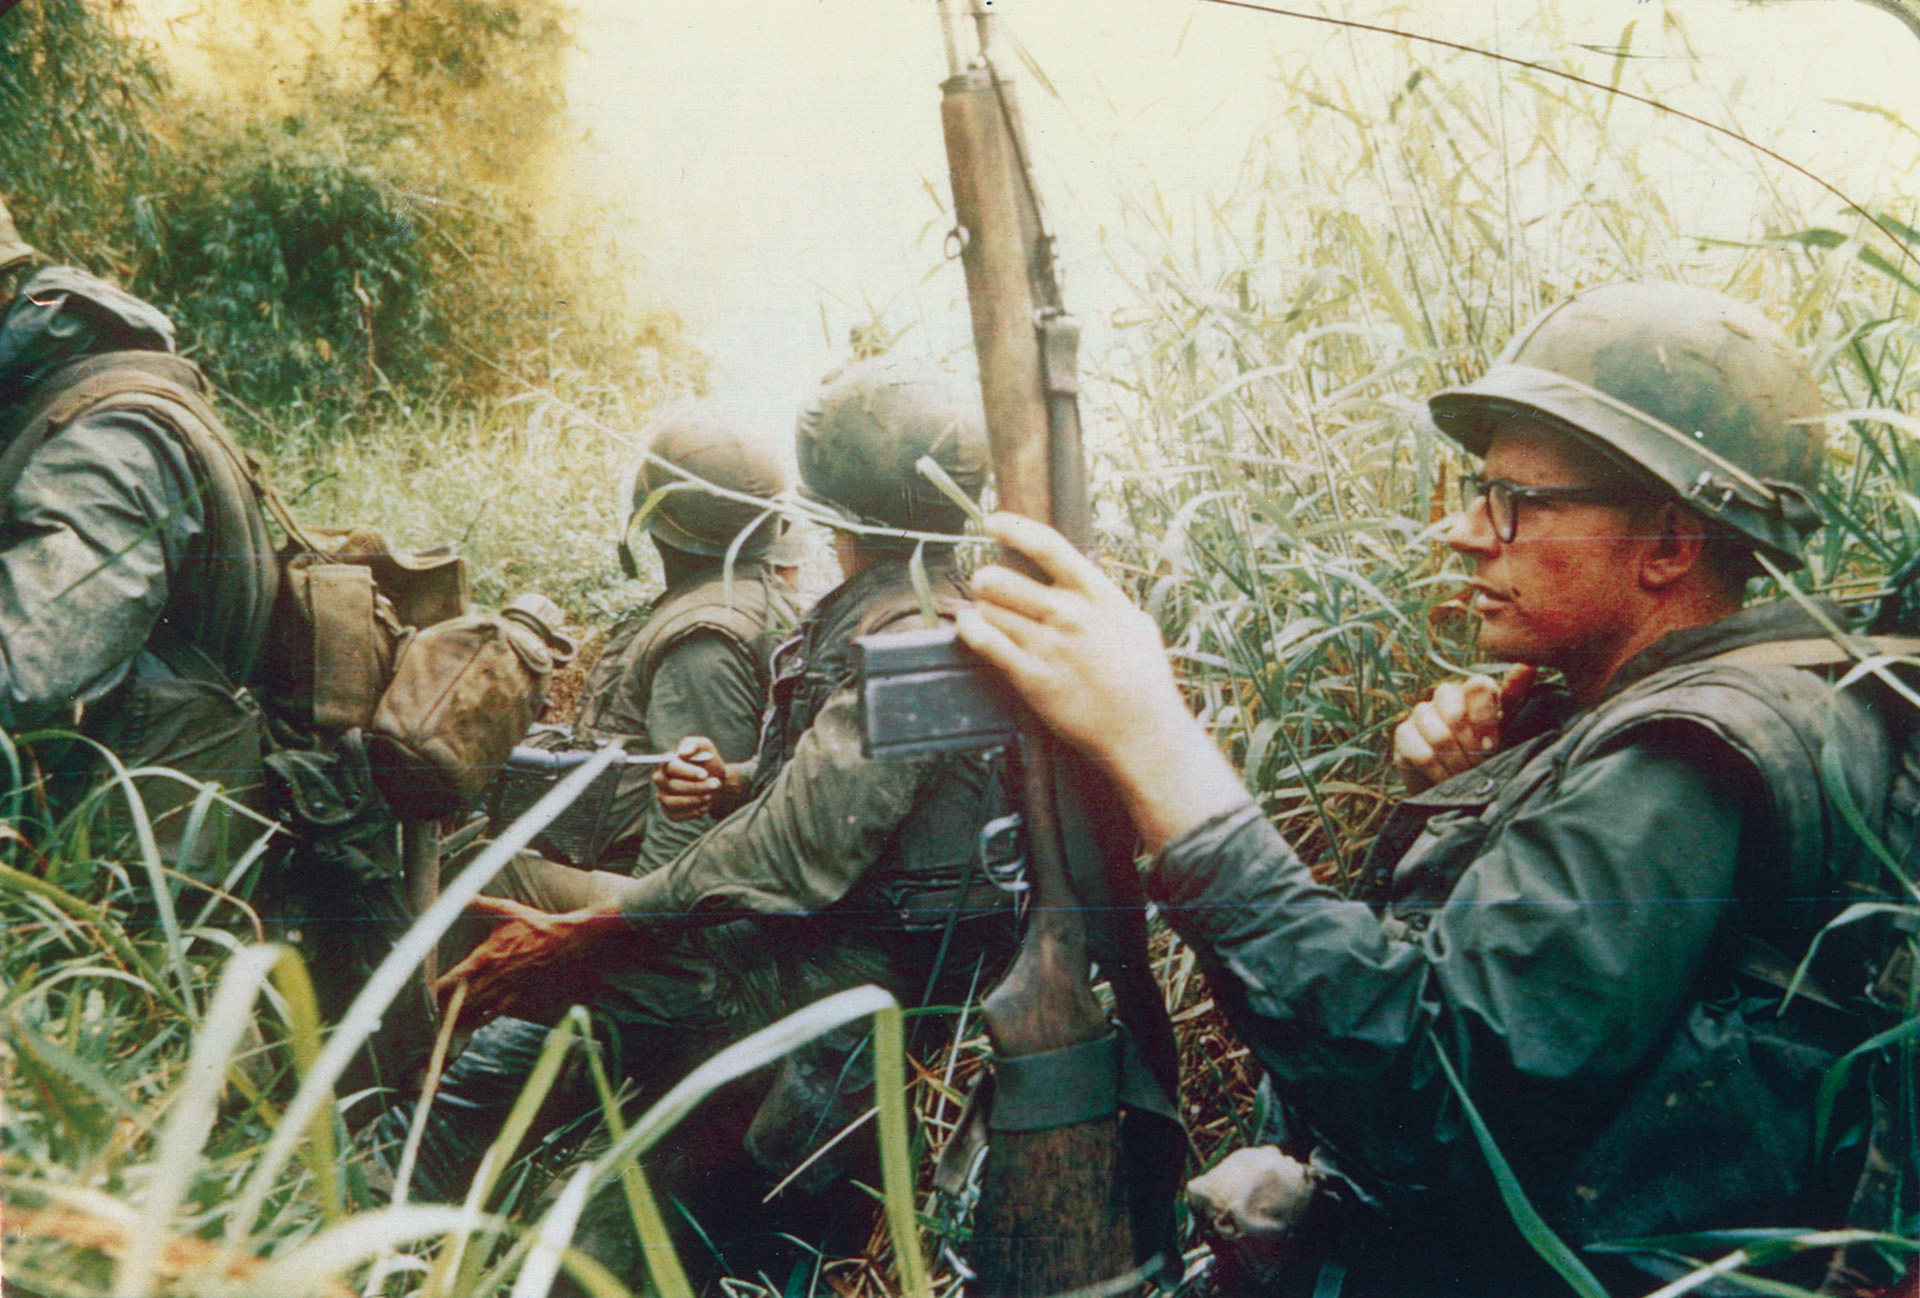 Wary of ever-present danger, members of 3rd Platoon’s E Company keep on the alert as they move through a trench before crossing a bamboo bridge near Con Thien.